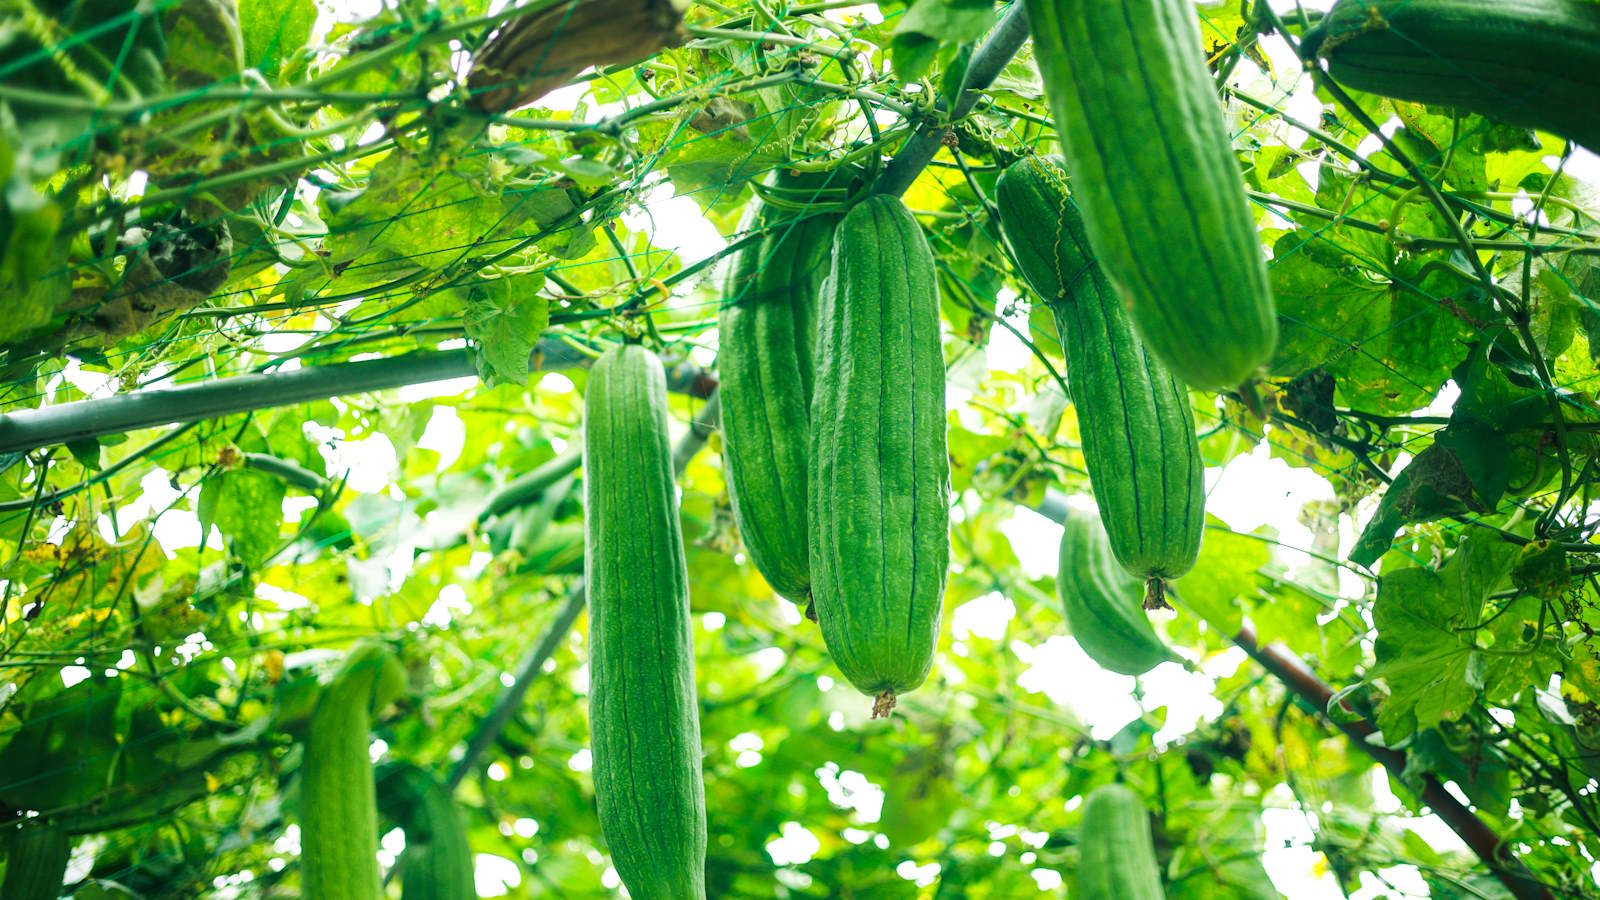 How to grow luffa: top tips for great harvests